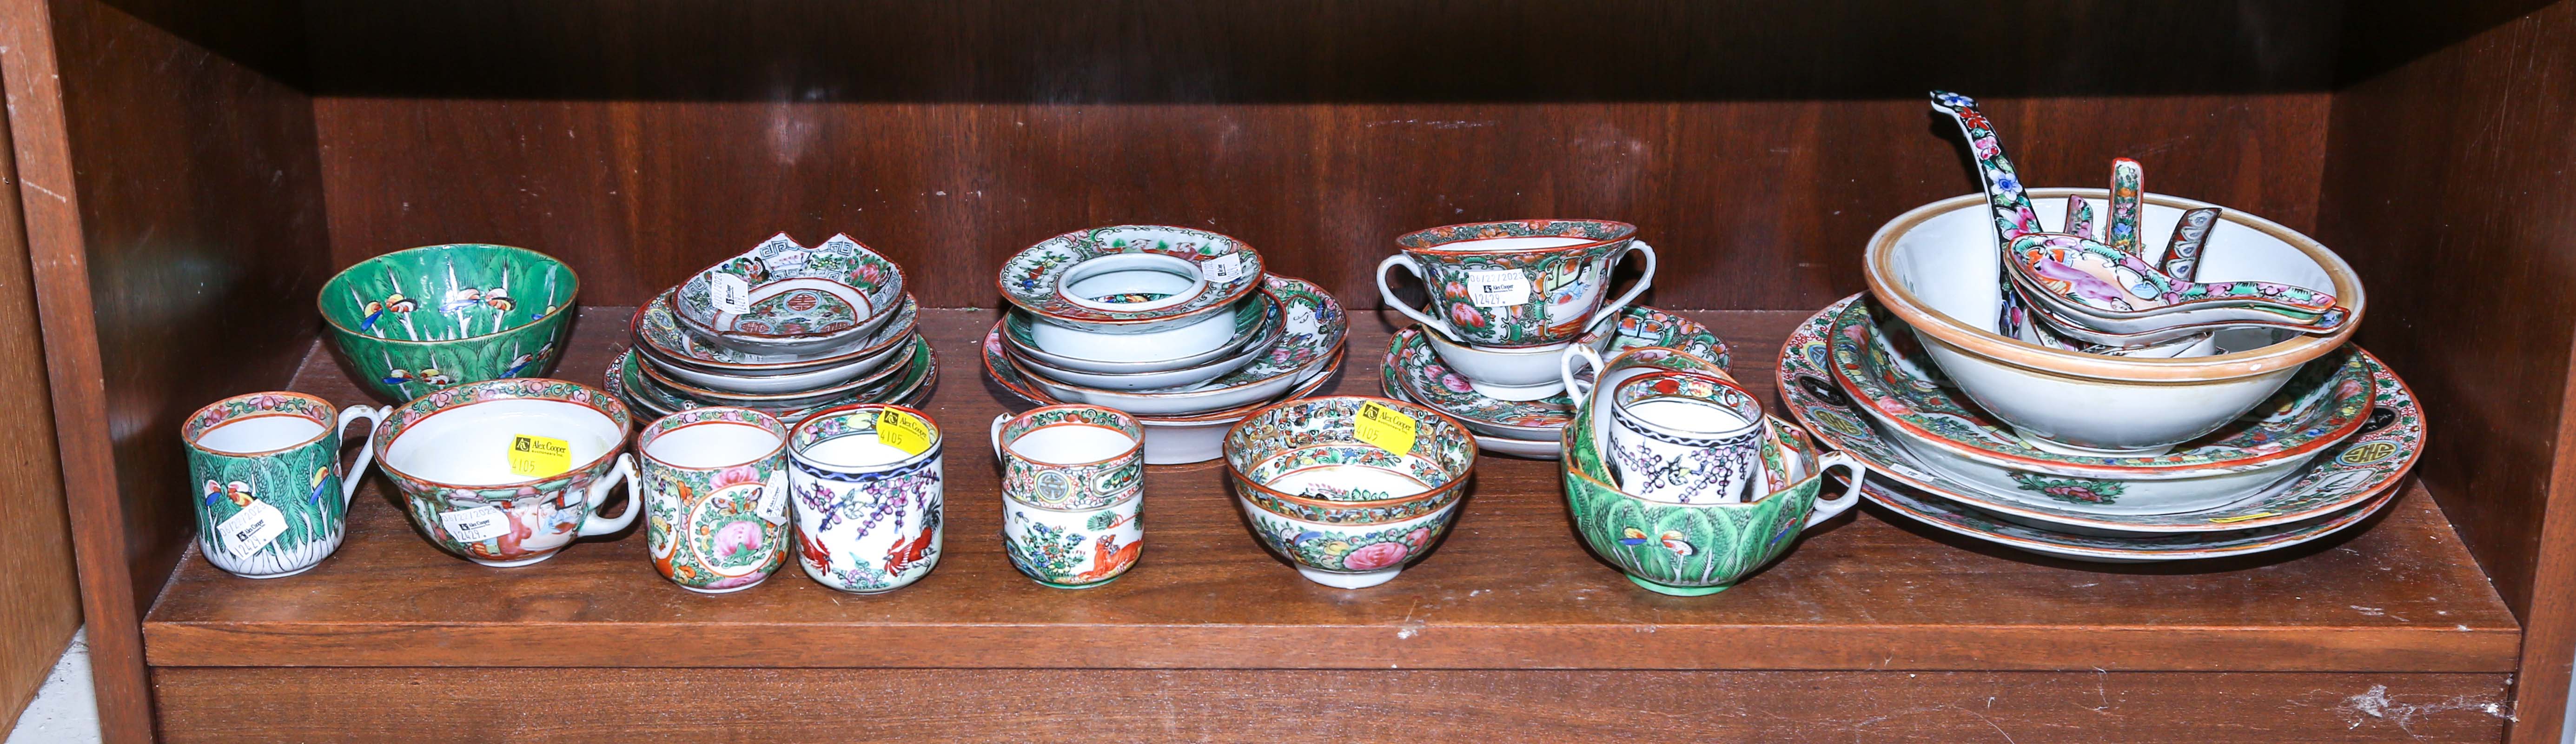 GROUP OF CHINESE EXPORT PORCELAIN 354a90